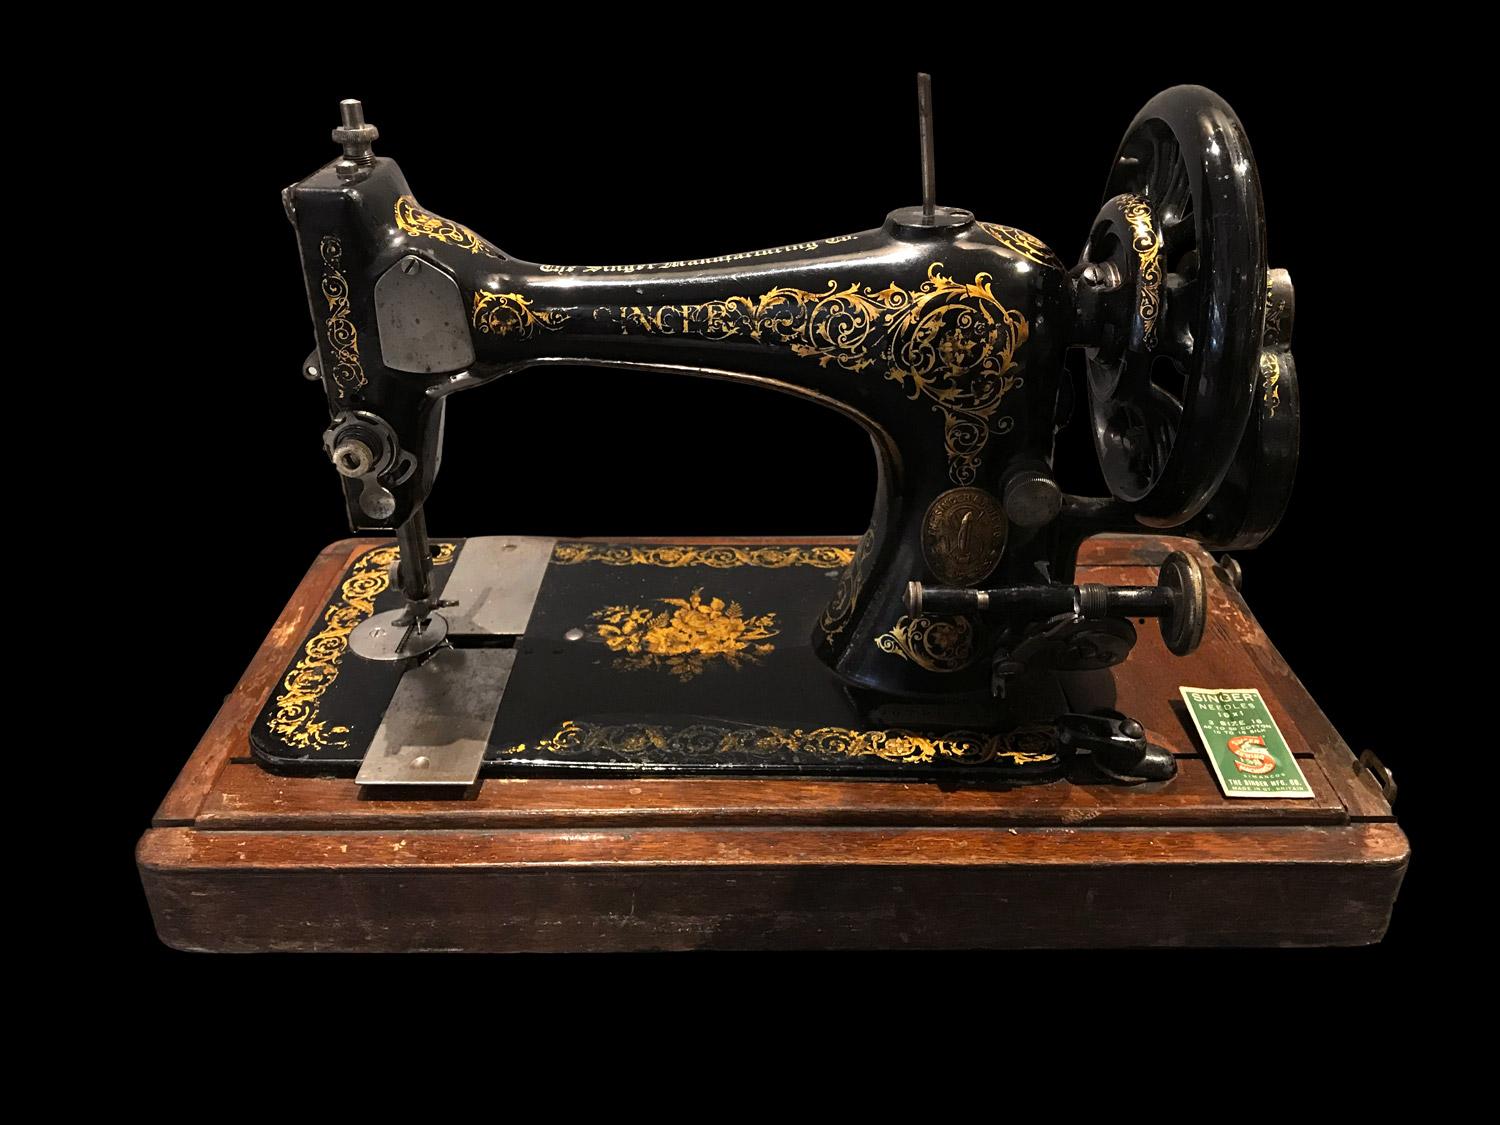 Singer sewing machine model Class 28 in black color decorated with gilt scrolls and roses.
Model with hand-crank (working condition). 
Serial number : 10798682, manufactured by Singer in 1892.
Sold in its original case and 2 original needles on